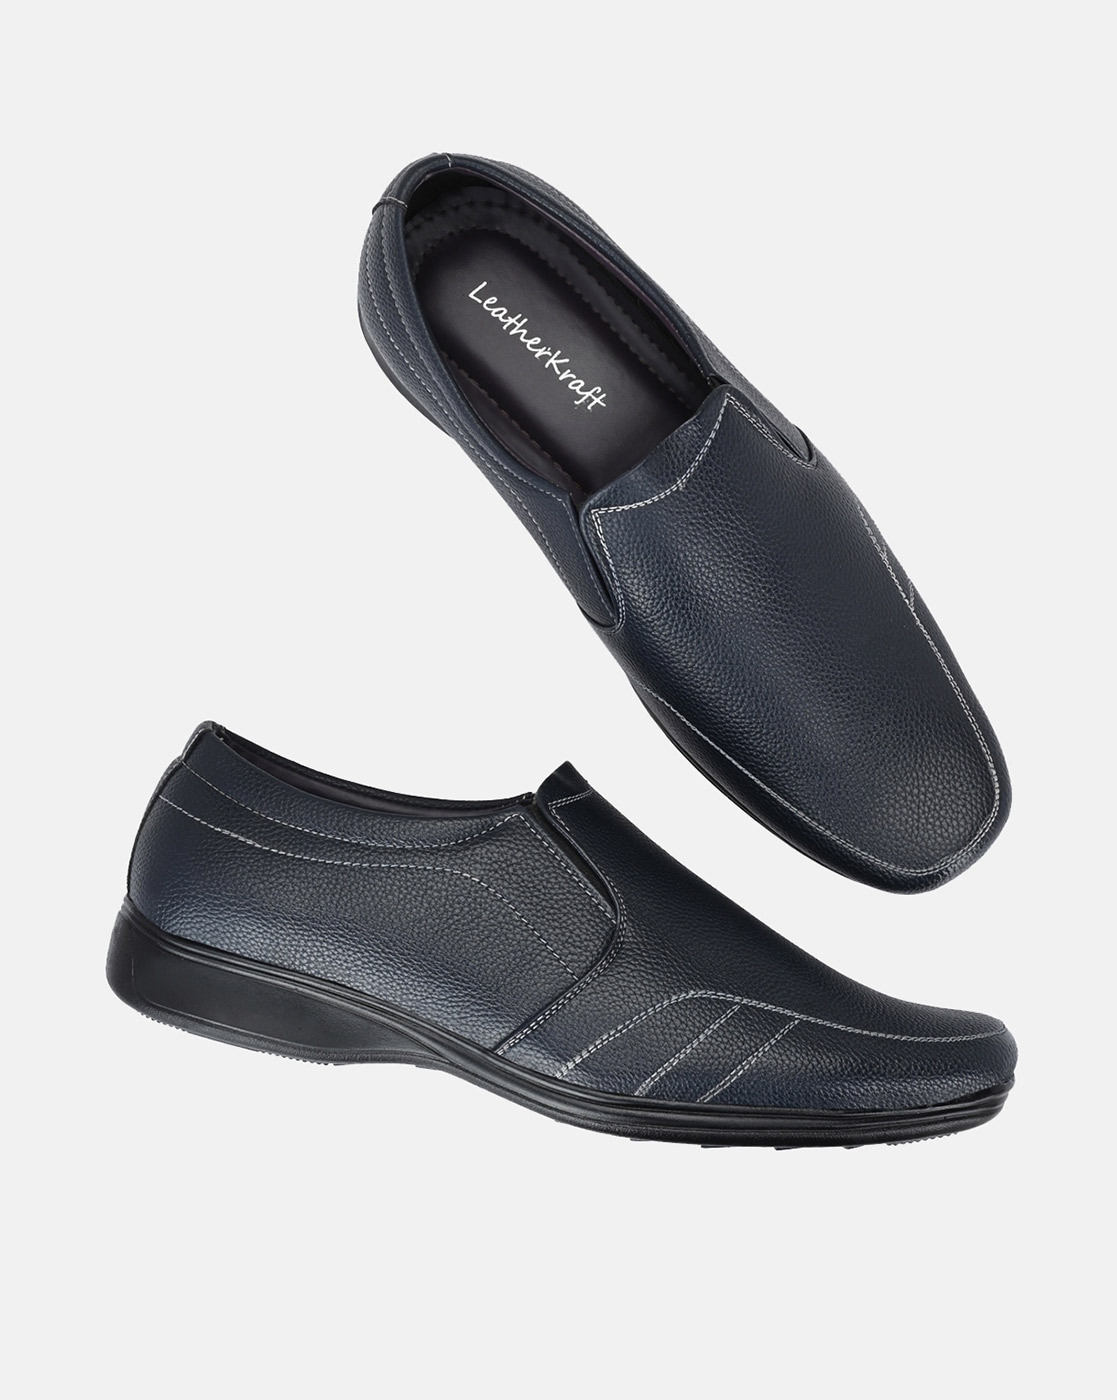 Buy Red Chief Men's Black Derby Shoes for Men at Best Price @ Tata CLiQ